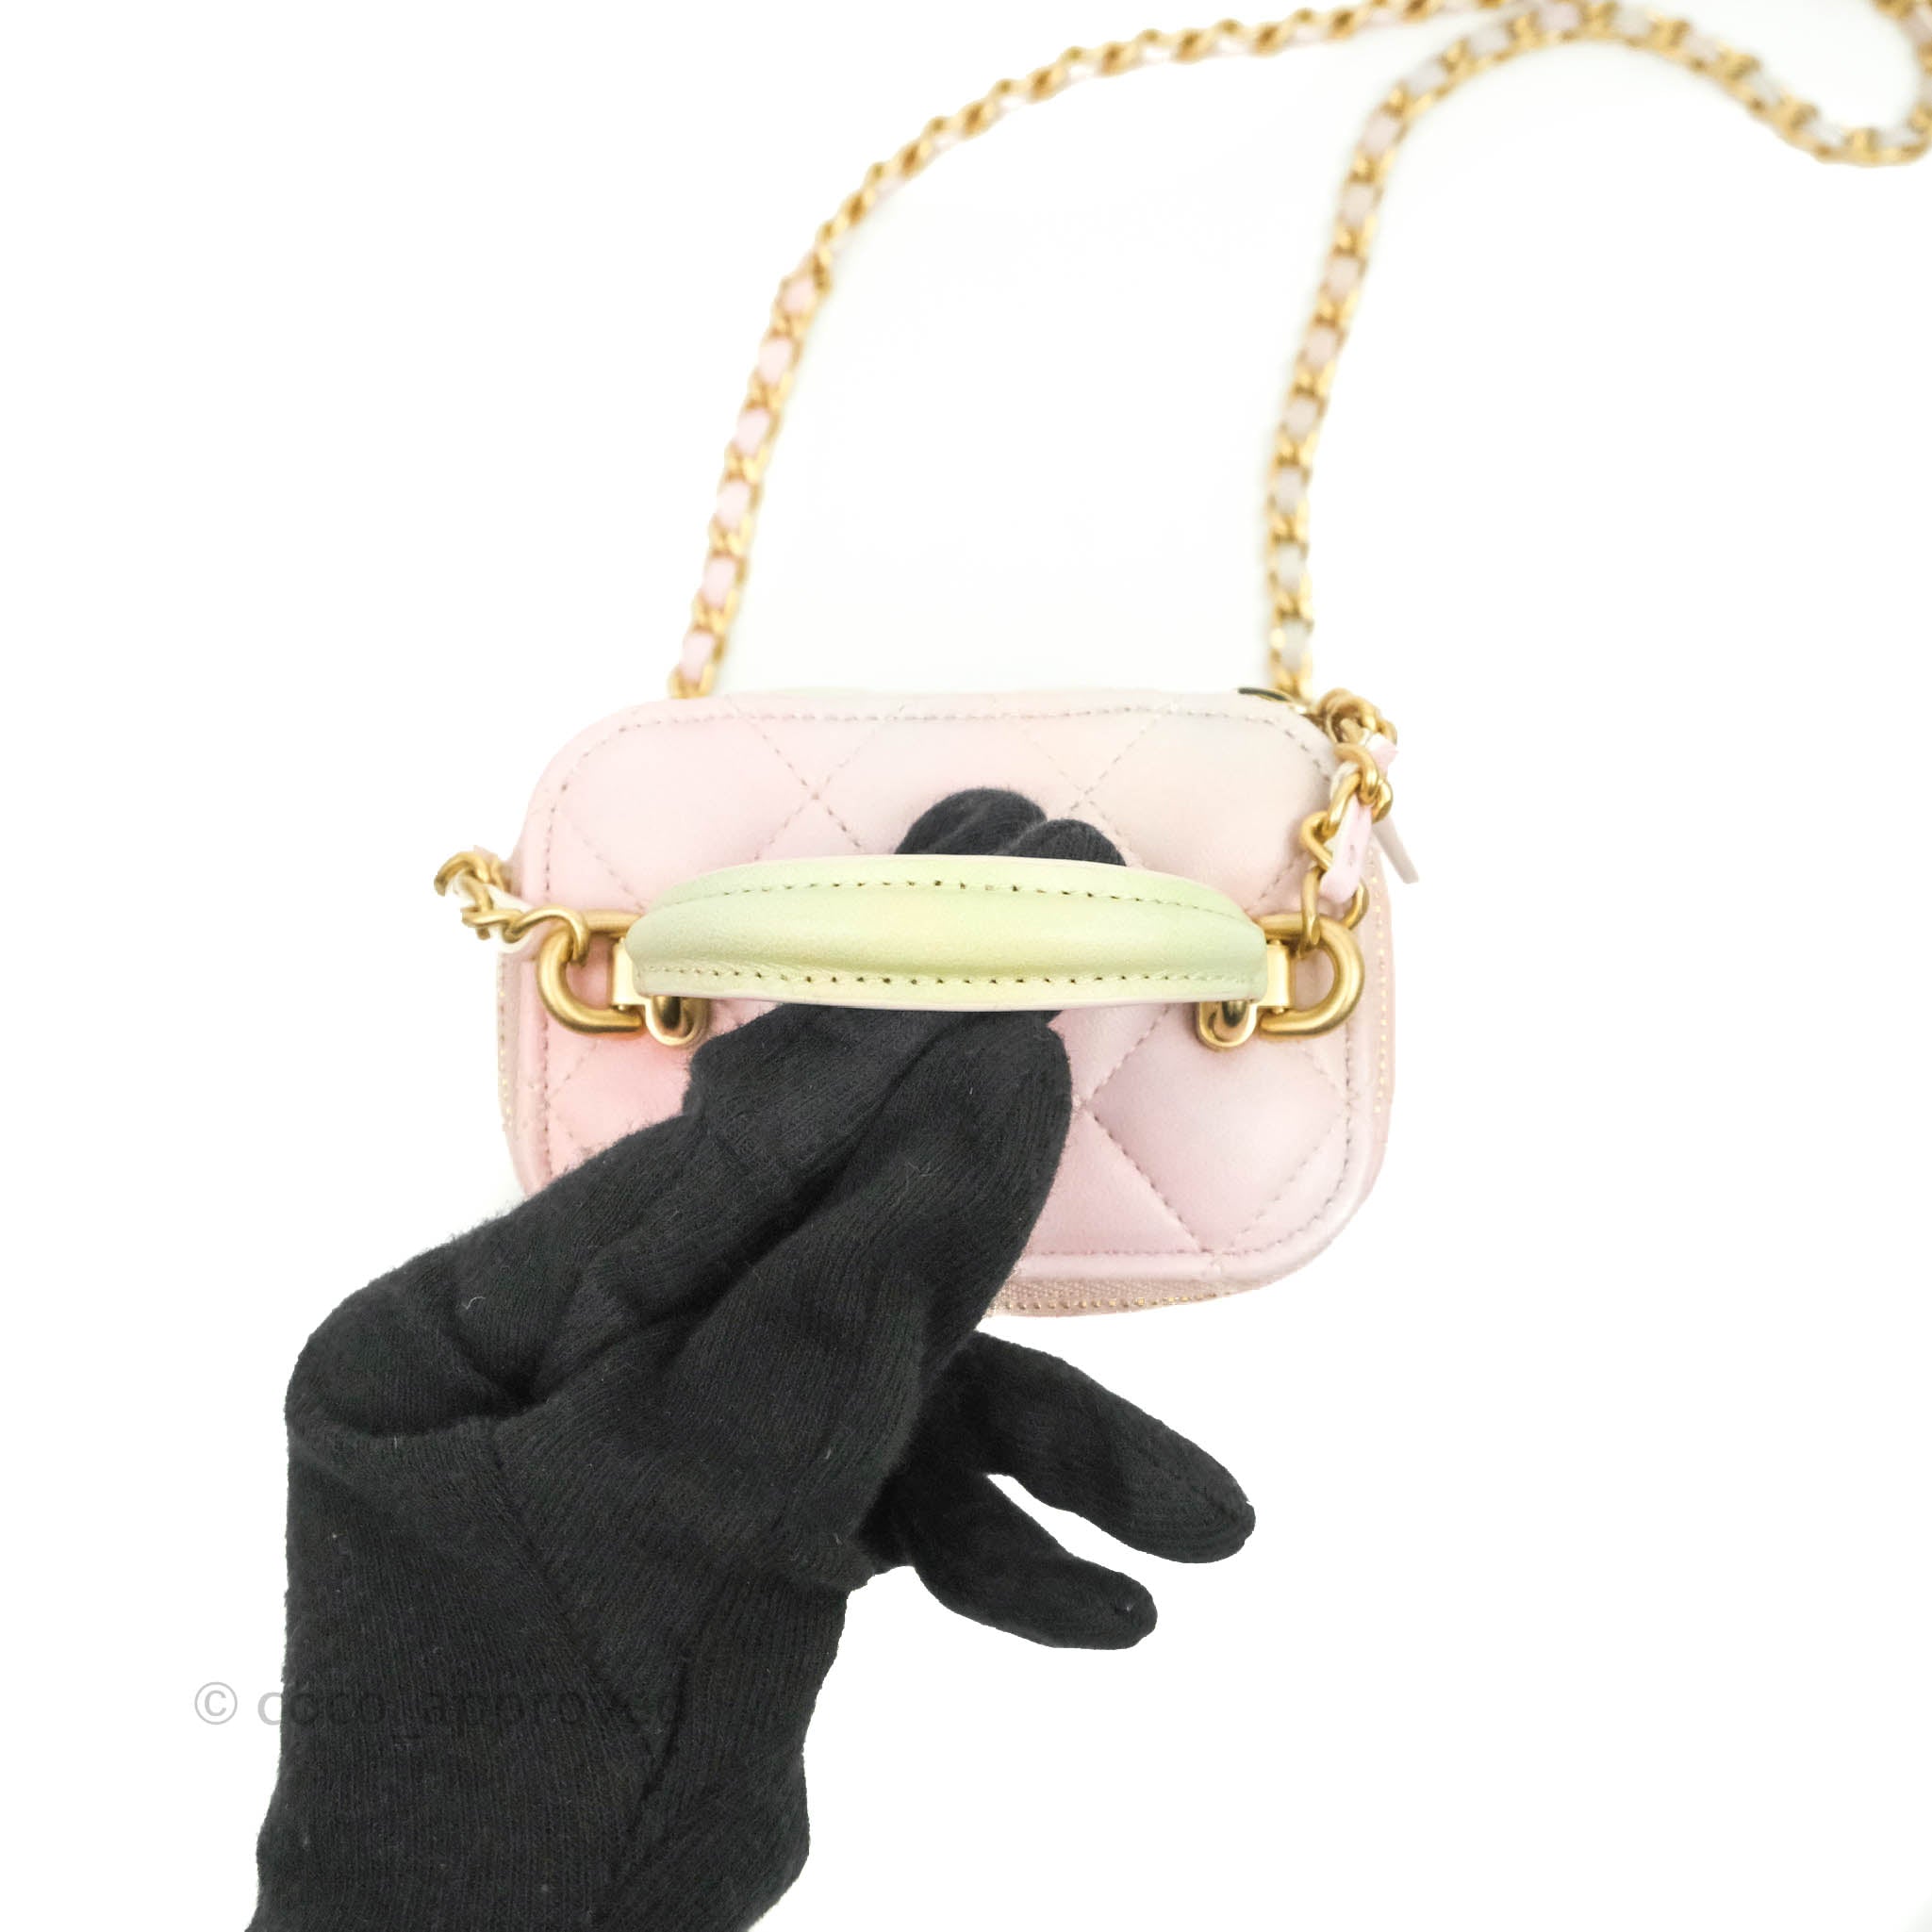 Chanel Mini Top Handle Vanity With Chain Black Lambskin Aged Gold Hard –  Coco Approved Studio